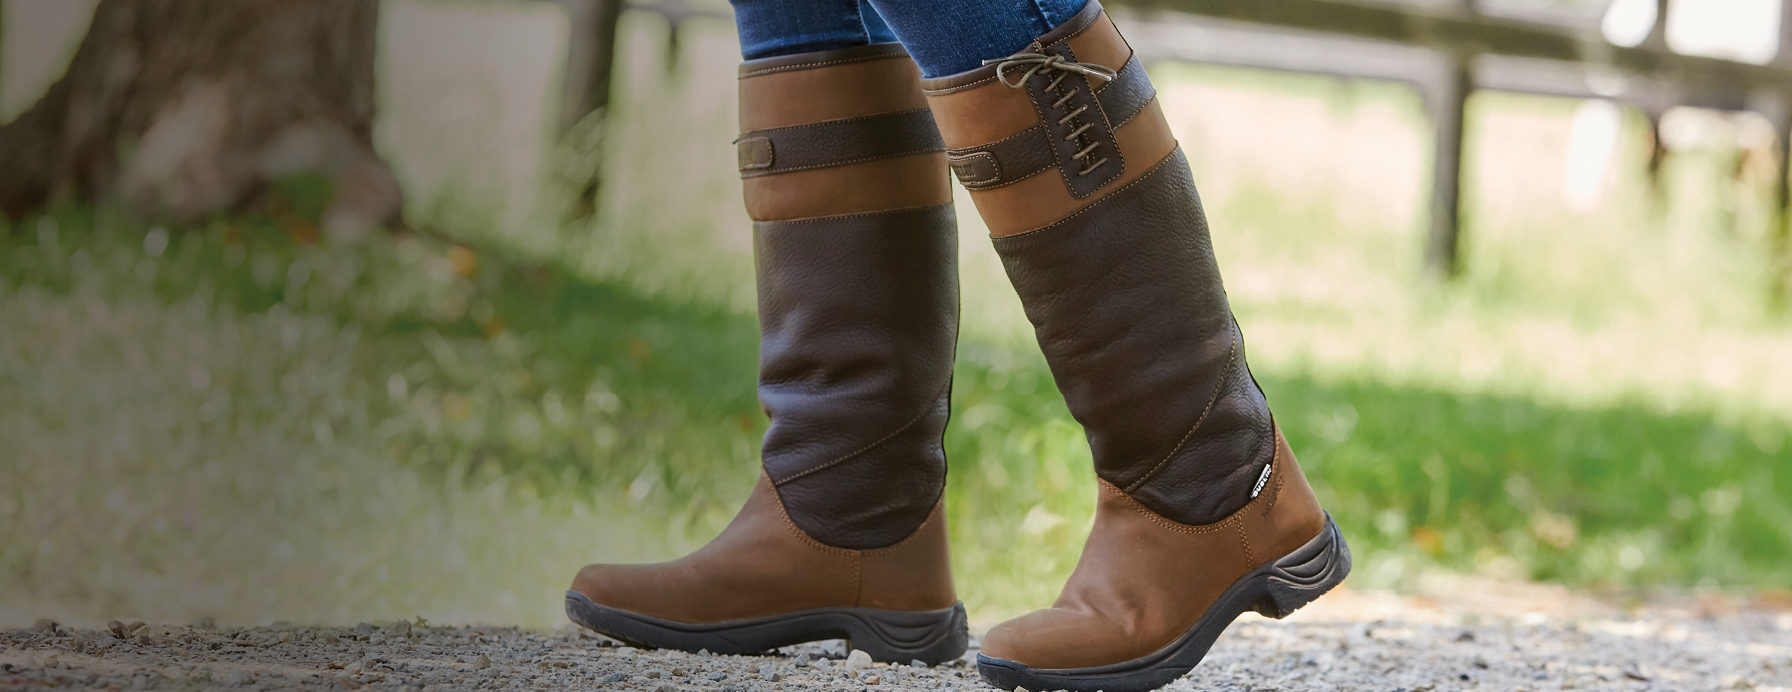 equestrian style boots